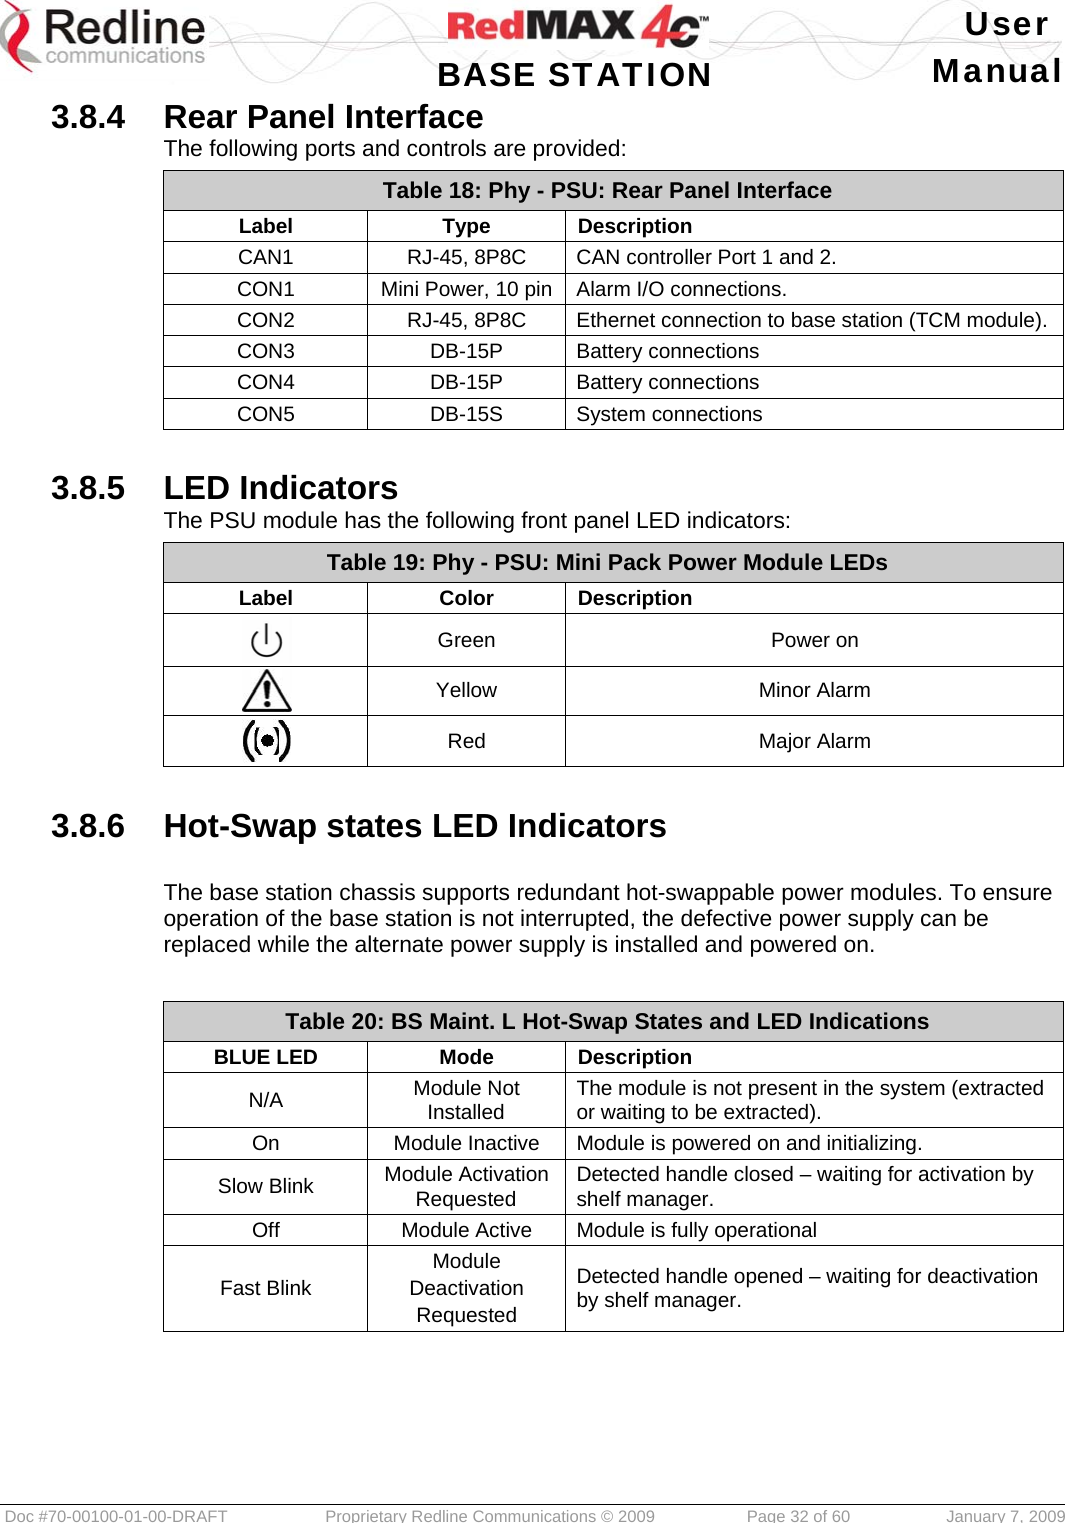   User  BASE STATION Manual  Doc #70-00100-01-00-DRAFT  Proprietary Redline Communications © 2009   Page 32 of 60  January 7, 2009 3.8.4  Rear Panel Interface The following ports and controls are provided: Table 18: Phy - PSU: Rear Panel Interface Label Type Description CAN1  RJ-45, 8P8C  CAN controller Port 1 and 2. CON1  Mini Power, 10 pin  Alarm I/O connections. CON2  RJ-45, 8P8C  Ethernet connection to base station (TCM module). CON3 DB-15P Battery connections CON4 DB-15P Battery connections CON5 DB-15S System connections  3.8.5  LED Indicators The PSU module has the following front panel LED indicators: Table 19: Phy - PSU: Mini Pack Power Module LEDs Label Color Description  Green Power on  Yellow Minor Alarm  Red Major Alarm  3.8.6  Hot-Swap states LED Indicators  The base station chassis supports redundant hot-swappable power modules. To ensure operation of the base station is not interrupted, the defective power supply can be replaced while the alternate power supply is installed and powered on.   Table 20: BS Maint. L Hot-Swap States and LED Indications BLUE LED  Mode  Description N/A  Module Not Installed  The module is not present in the system (extracted or waiting to be extracted). On  Module Inactive  Module is powered on and initializing. Slow Blink  Module Activation Requested  Detected handle closed – waiting for activation by shelf manager. Off  Module Active  Module is fully operational Fast Blink Module Deactivation Requested Detected handle opened – waiting for deactivation by shelf manager.   